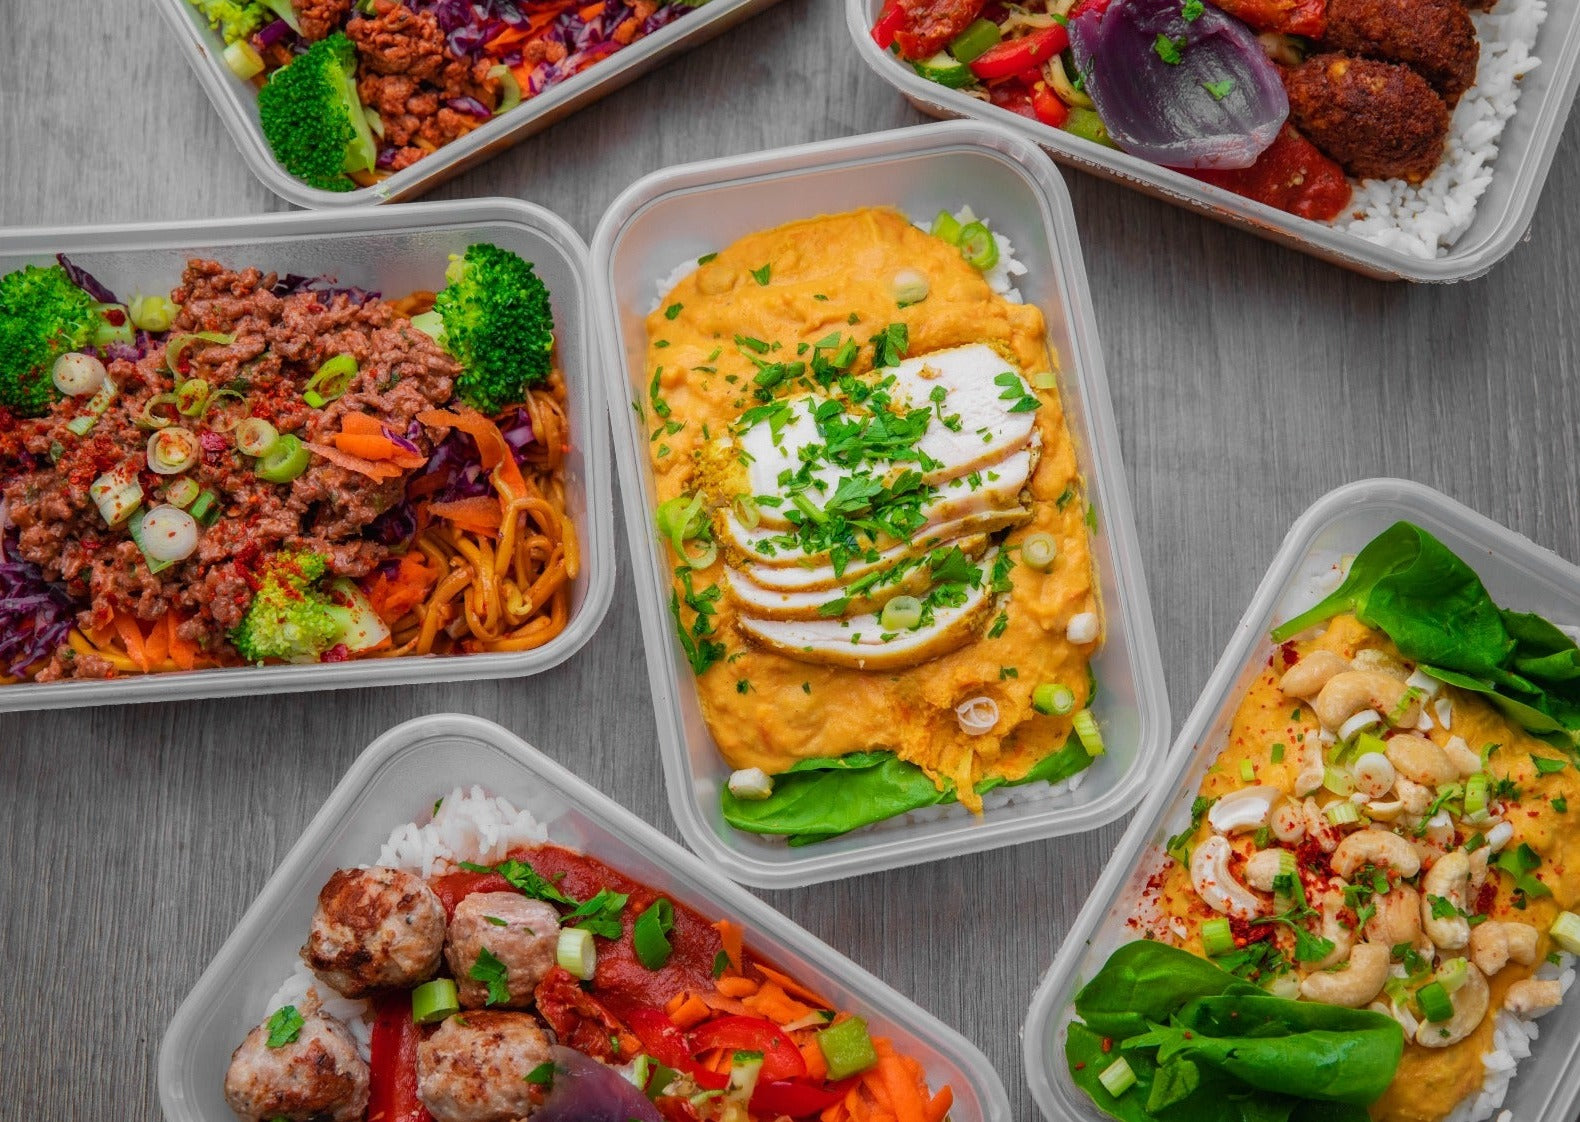 Bennobox Healthy meal prep delivered across Liverpool ready meals